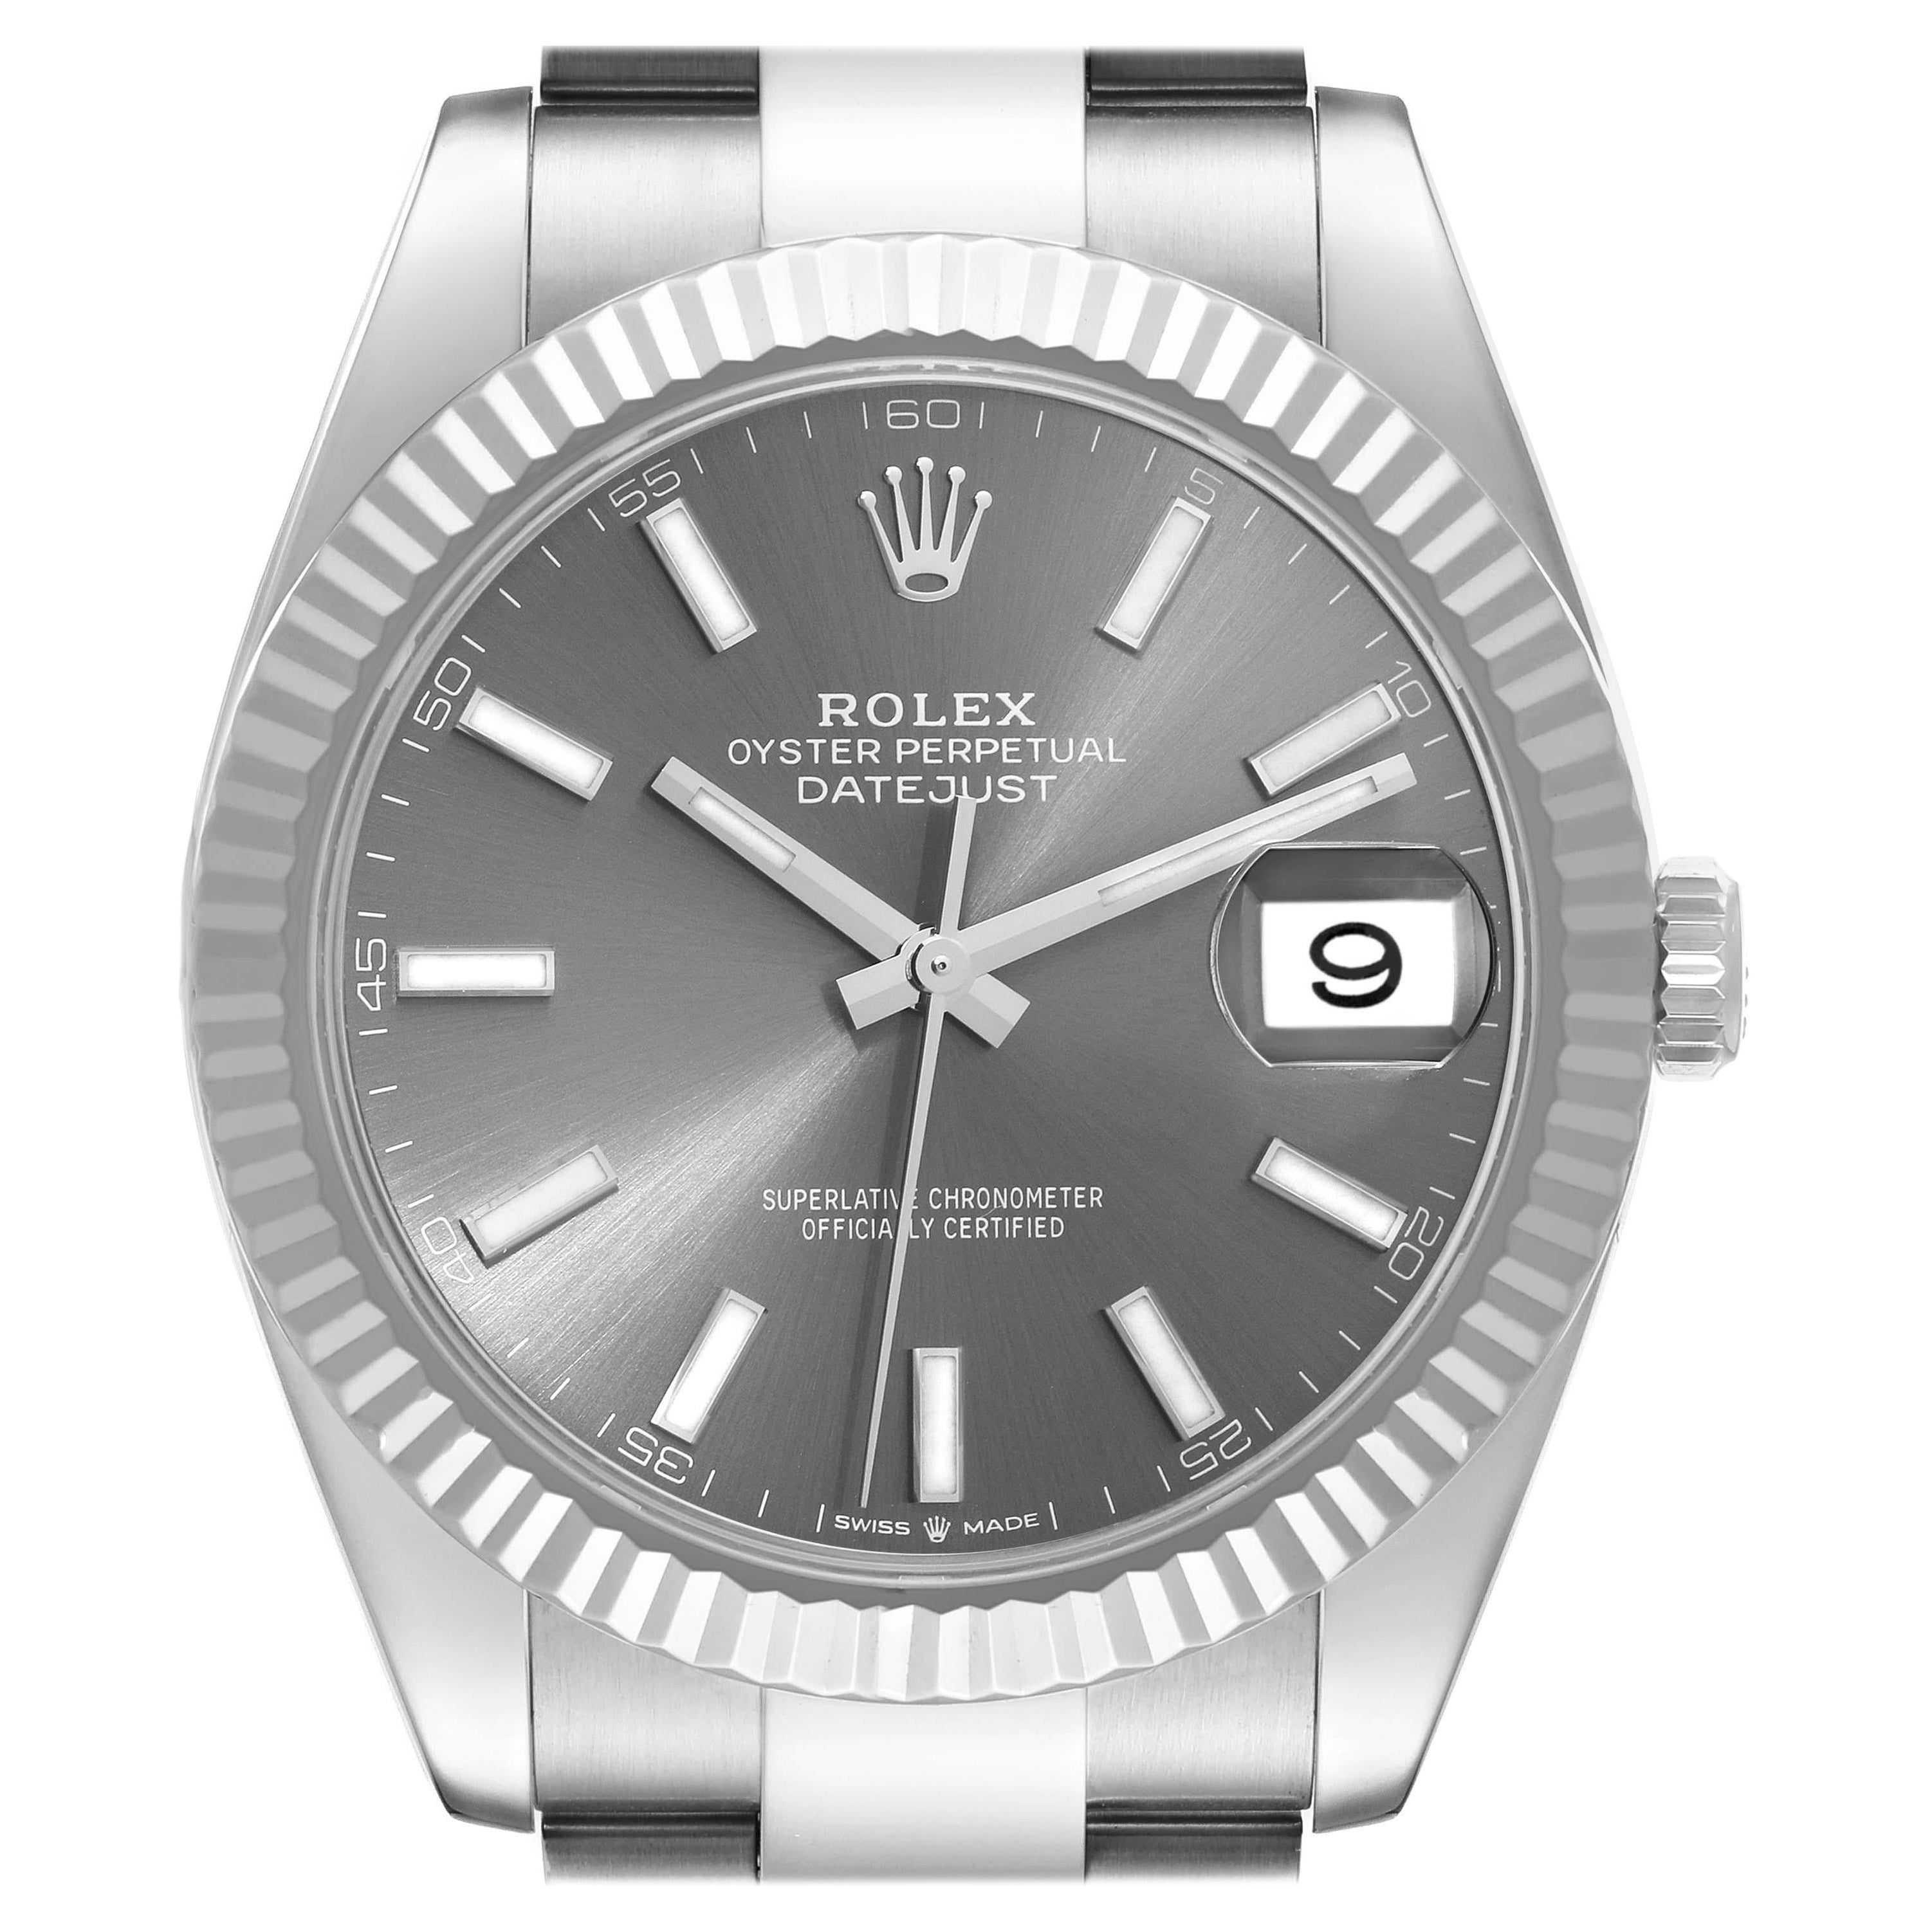 Rolex Datejust 41 Steel White Gold Slate Dial Mens Watch 126334 Box Card For Sale